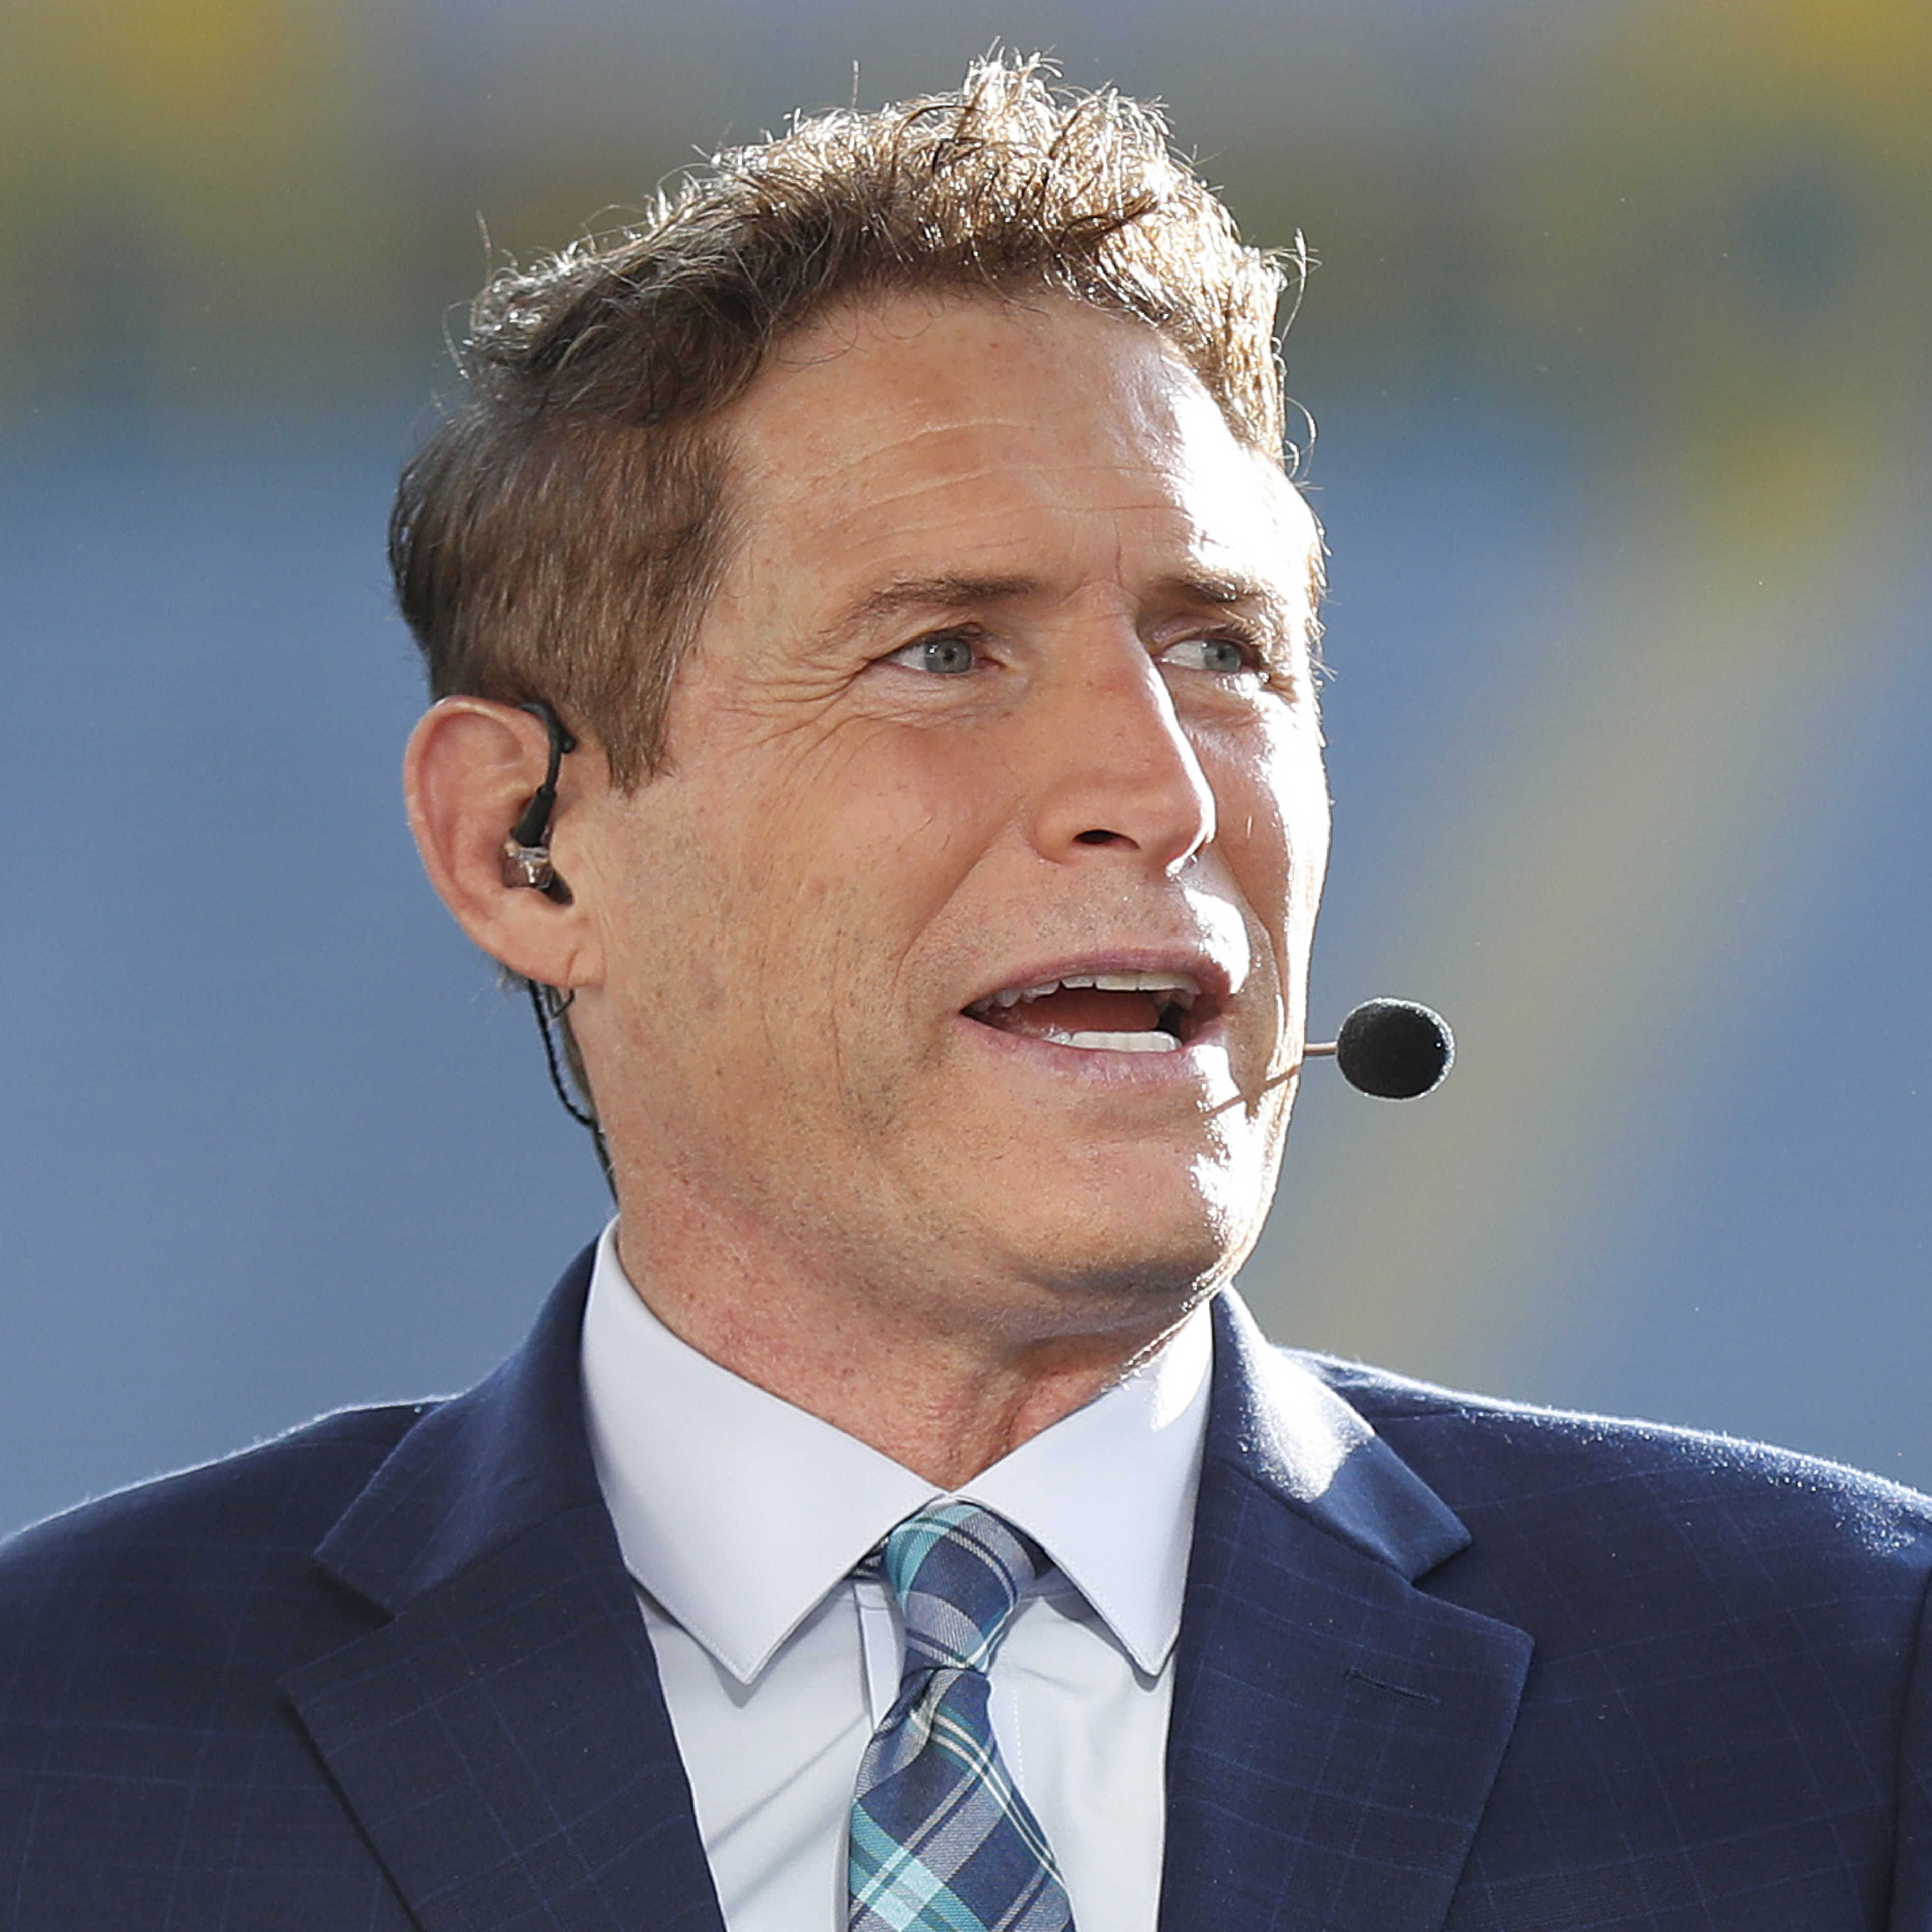 NFL HOFer Steve Young Opens Up About Mental Health, Childhood Separation Anxiety